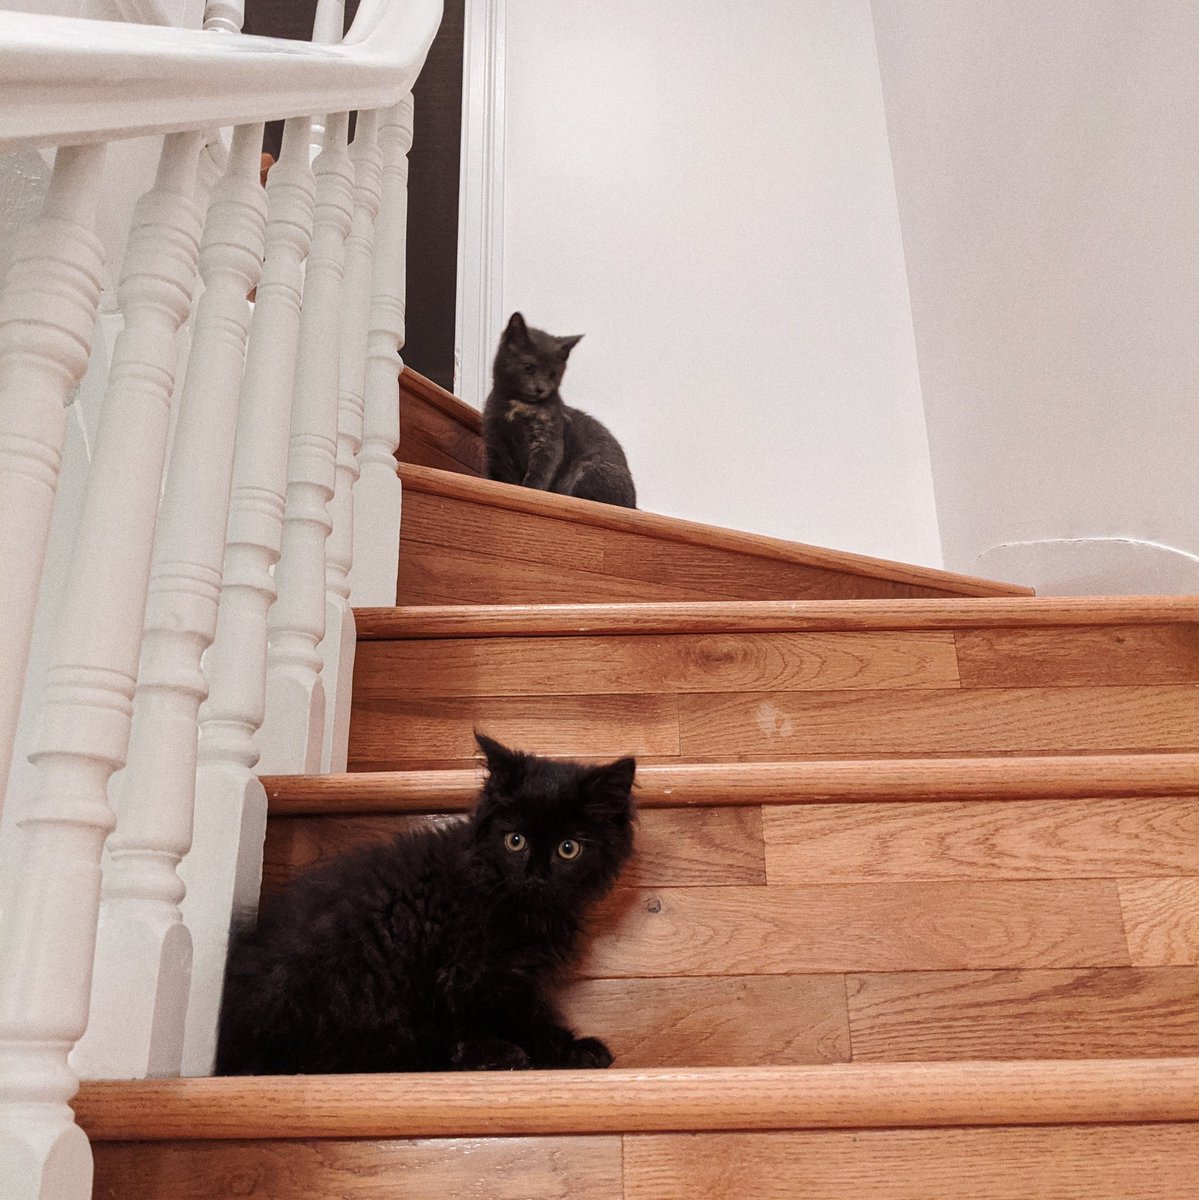 They're getting better at stairs. Sort of. Sid was first up but has a hard time coming down without falling or getting scared. Fern is now bounding up and down with no issue. Sid just hasn't grown big enough yet to keep up with Fern's giant back legs.